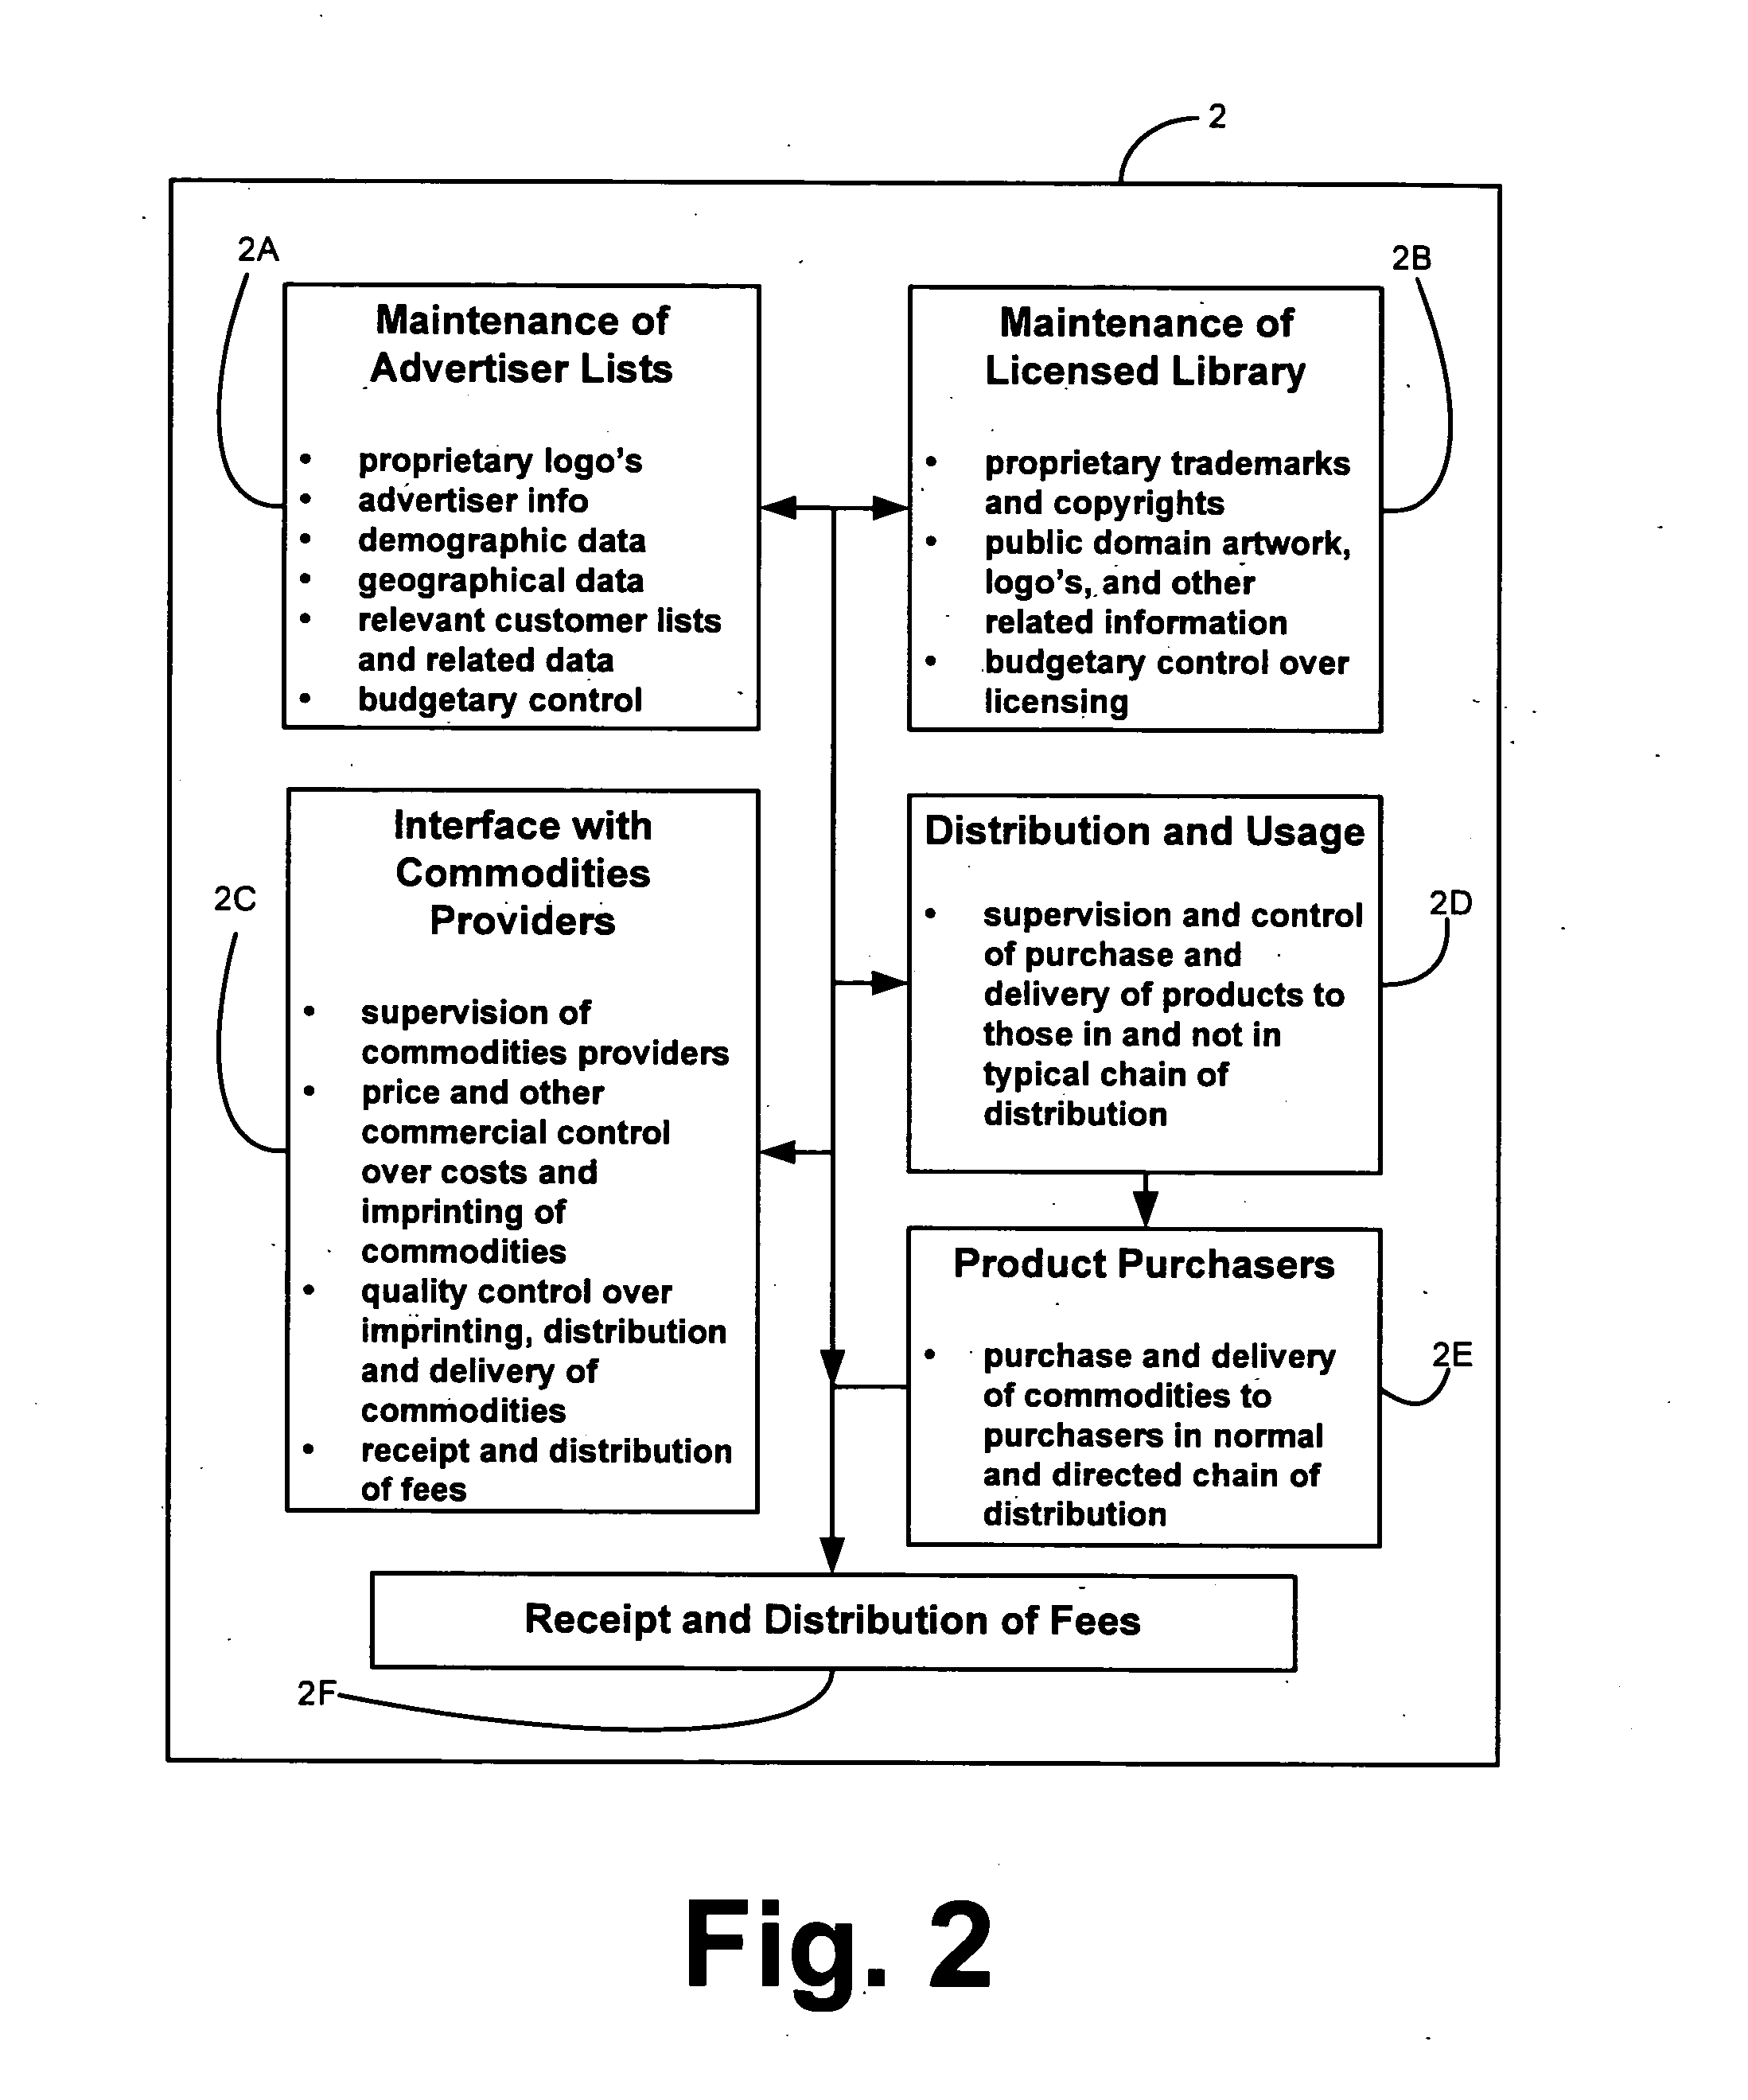 Method and system for the determination and dissemination of brand-related artwork on commodity-based products